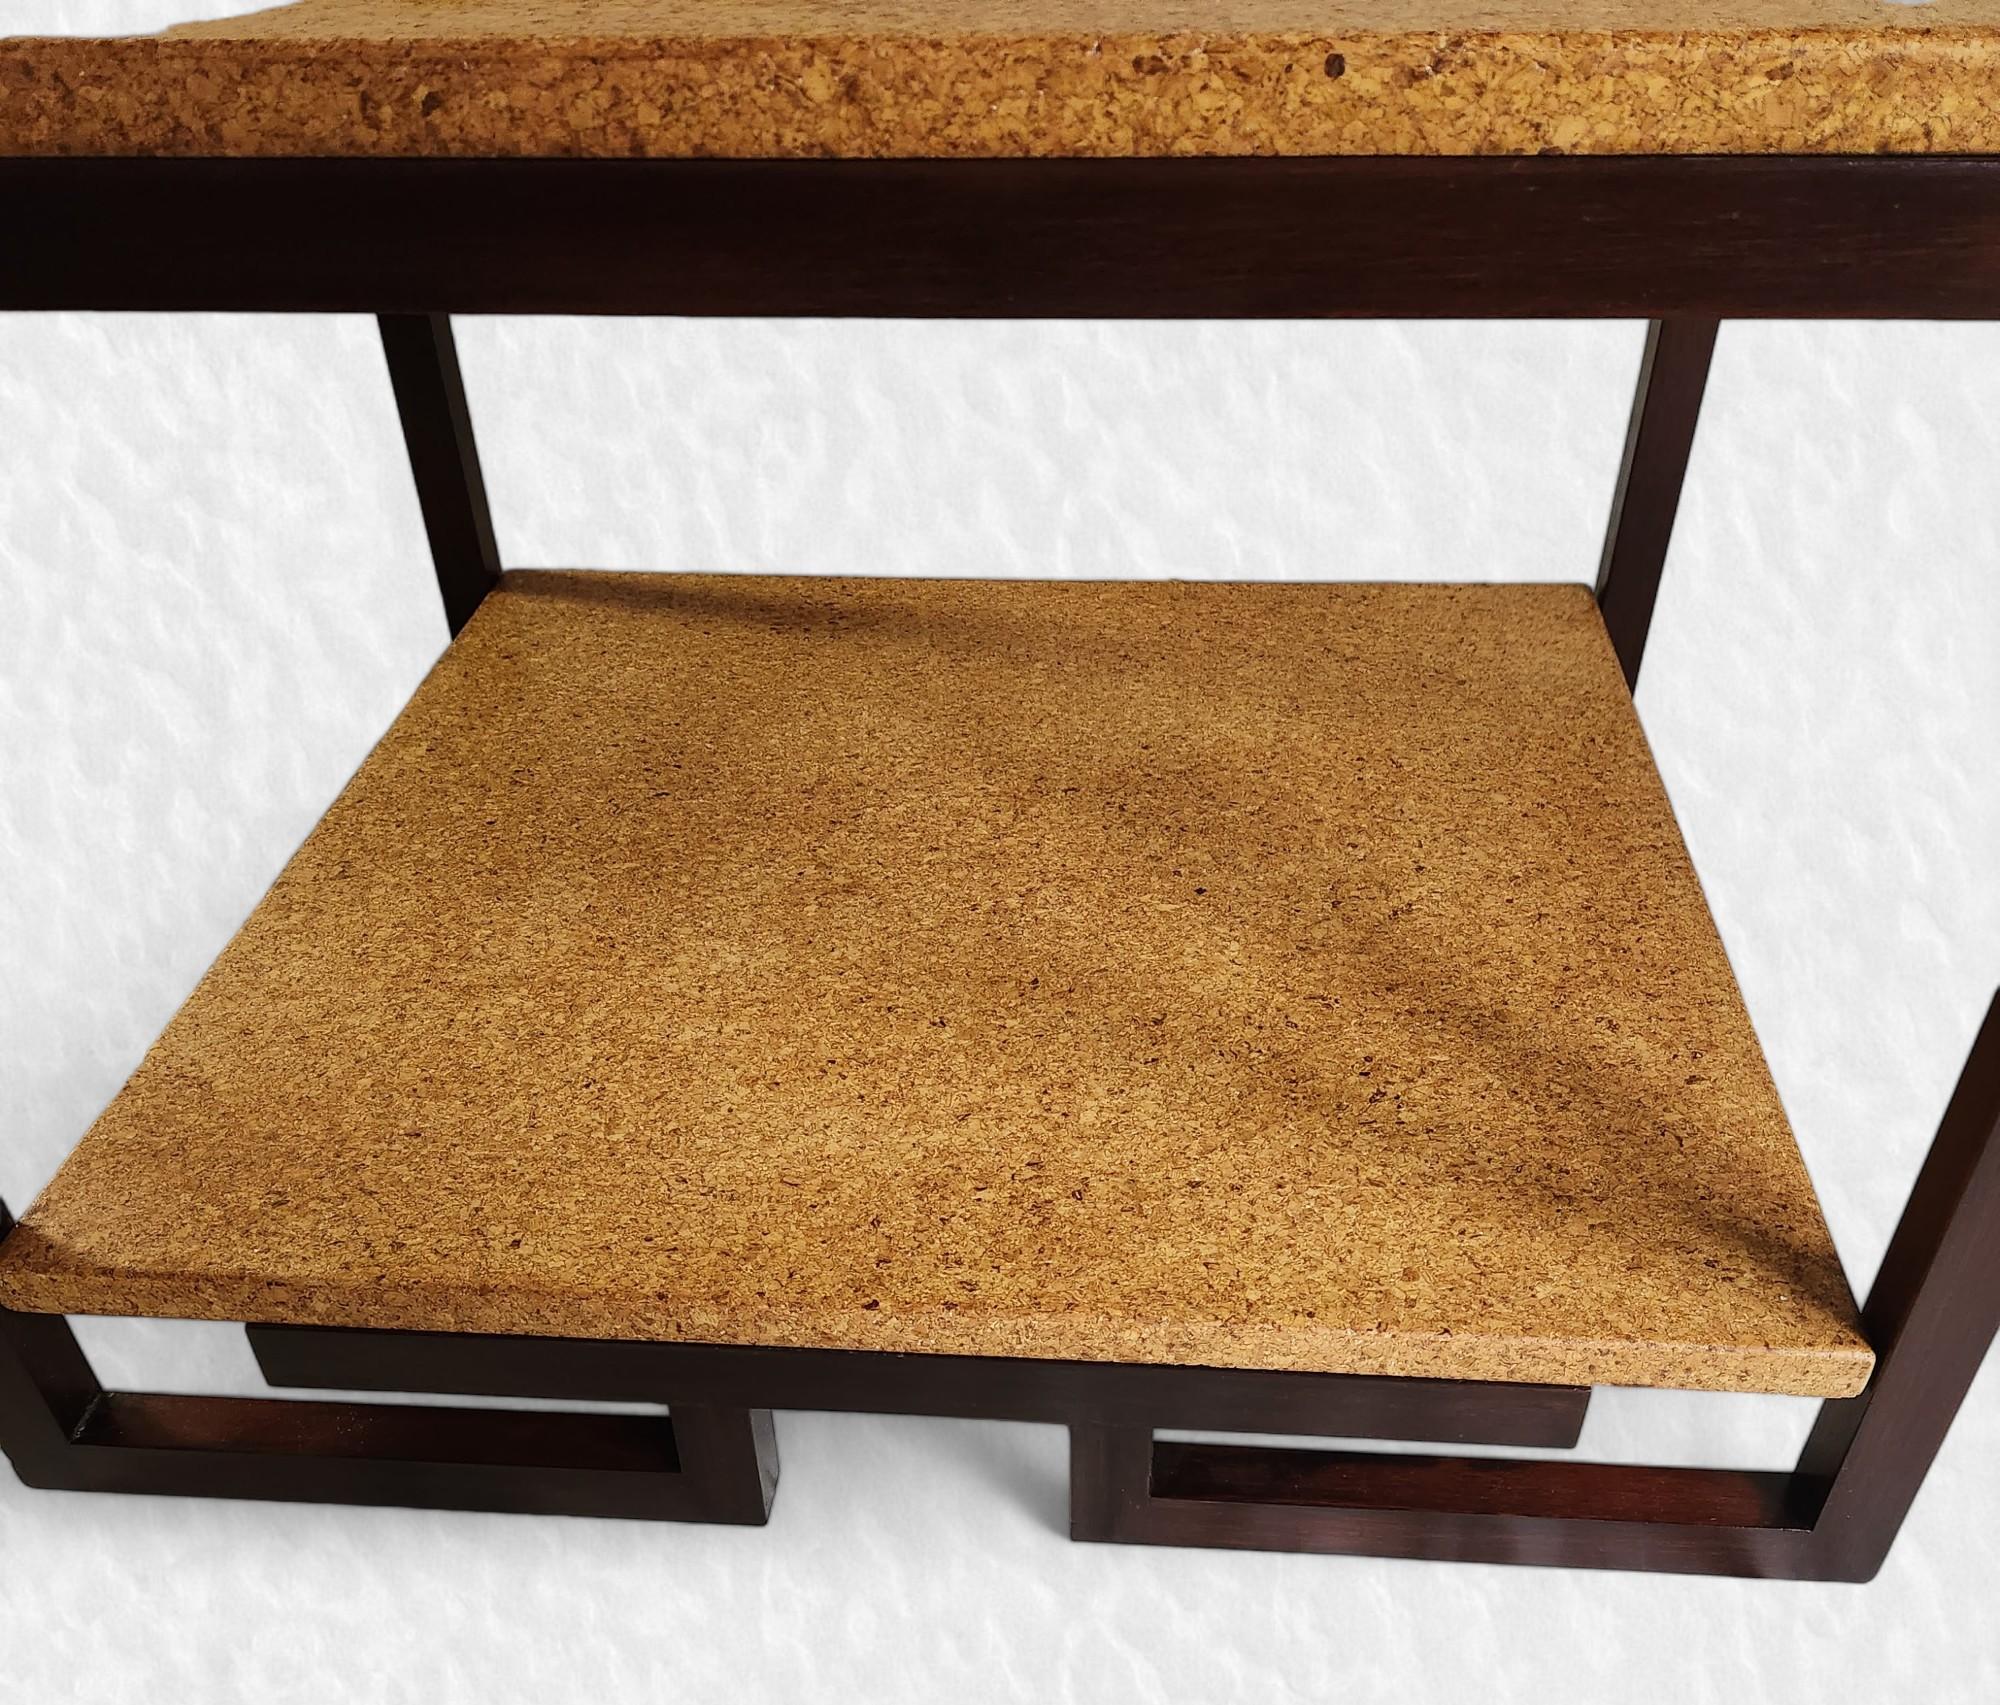 American Paul Frankl Mahogany Coffee Table with Cork Tops Johnson Furniture c. 1940s/50s For Sale